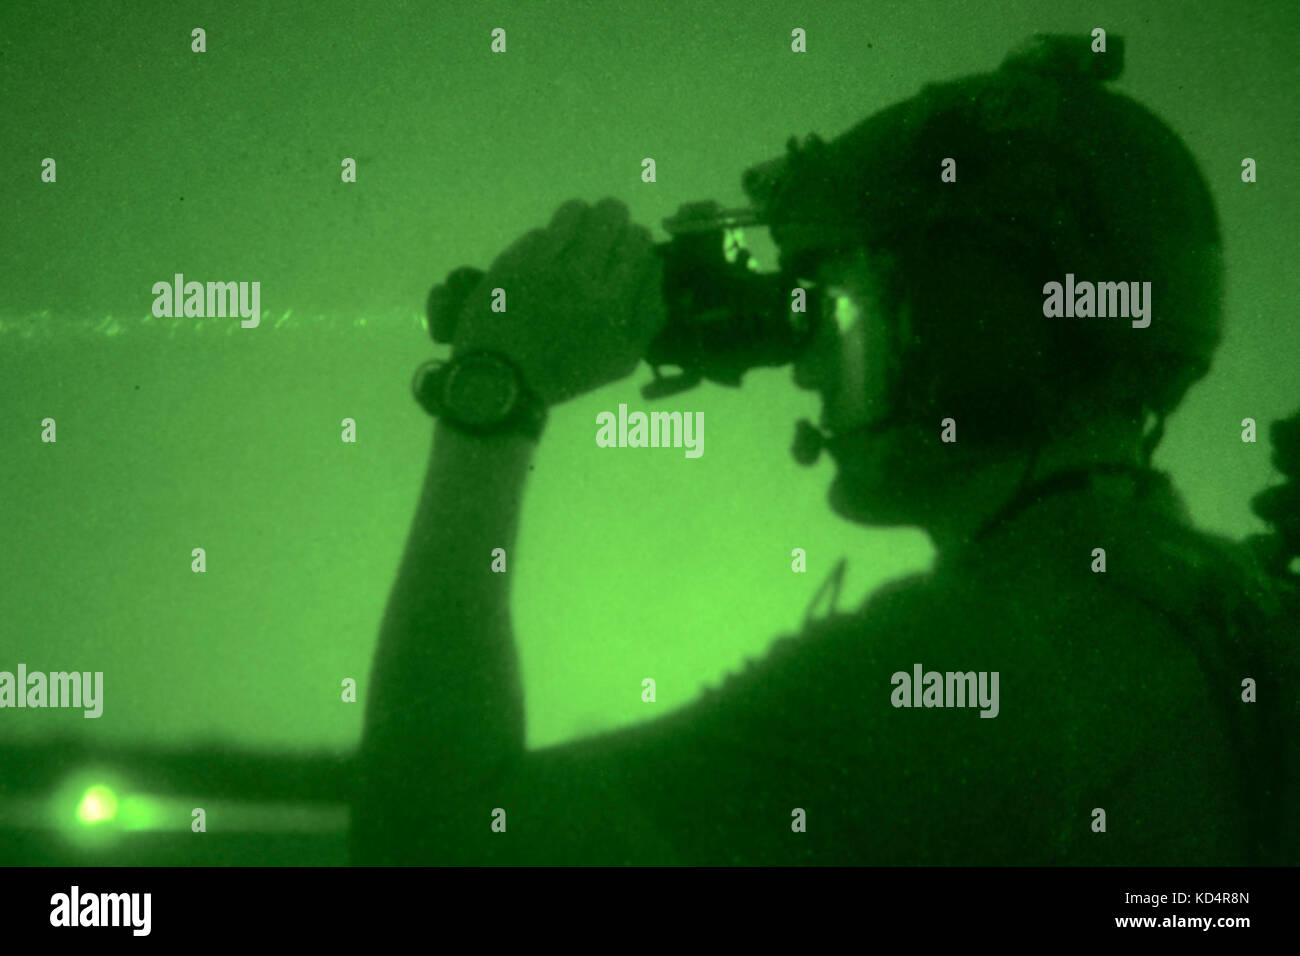 A U.S. Air Force Joint Terminal Attack Controller assigned to the 22nd Special Tactics Squadron uses a laser to designate a target for aircraft overhead at Poinsett Electronic Combat Range on Shaw Air Force Base, S.C., May 21, 2014.  Elements of the South Carolina Army and Air National Guard, U.S. Army and U.S. Air Force special operations, and Columbia Police Department S.W.A.T., conducted nighttime training, which allowed special operations forces and the National Guard to conduct joint urban assault training. (U.S. Army National Guard photo by Sgt. Brian Calhoun/Released) Stock Photo